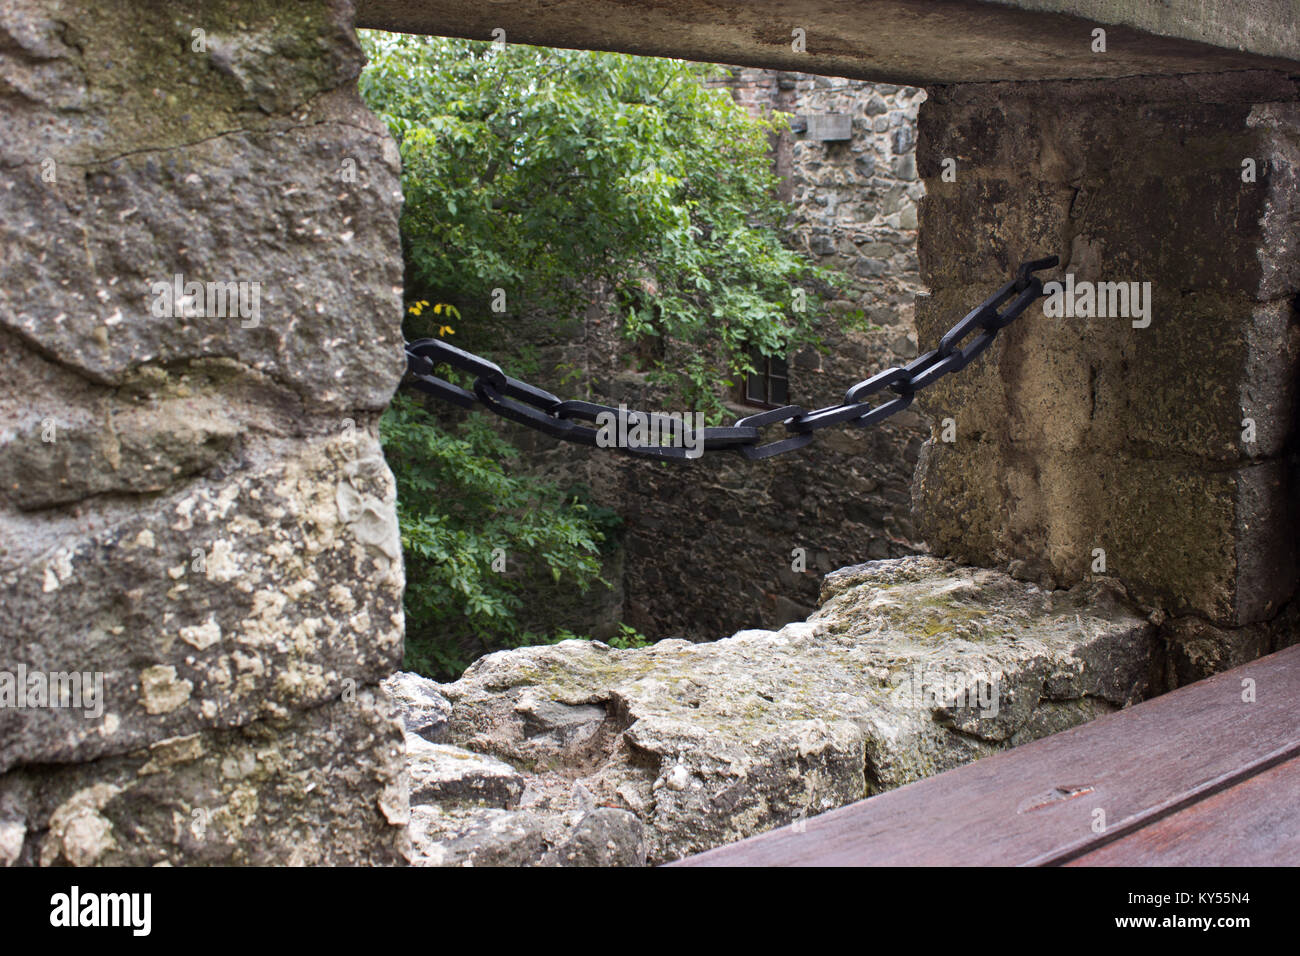 View over the loophole protected chain in the castle. In the foreground is a wooden bench. Stock Photo